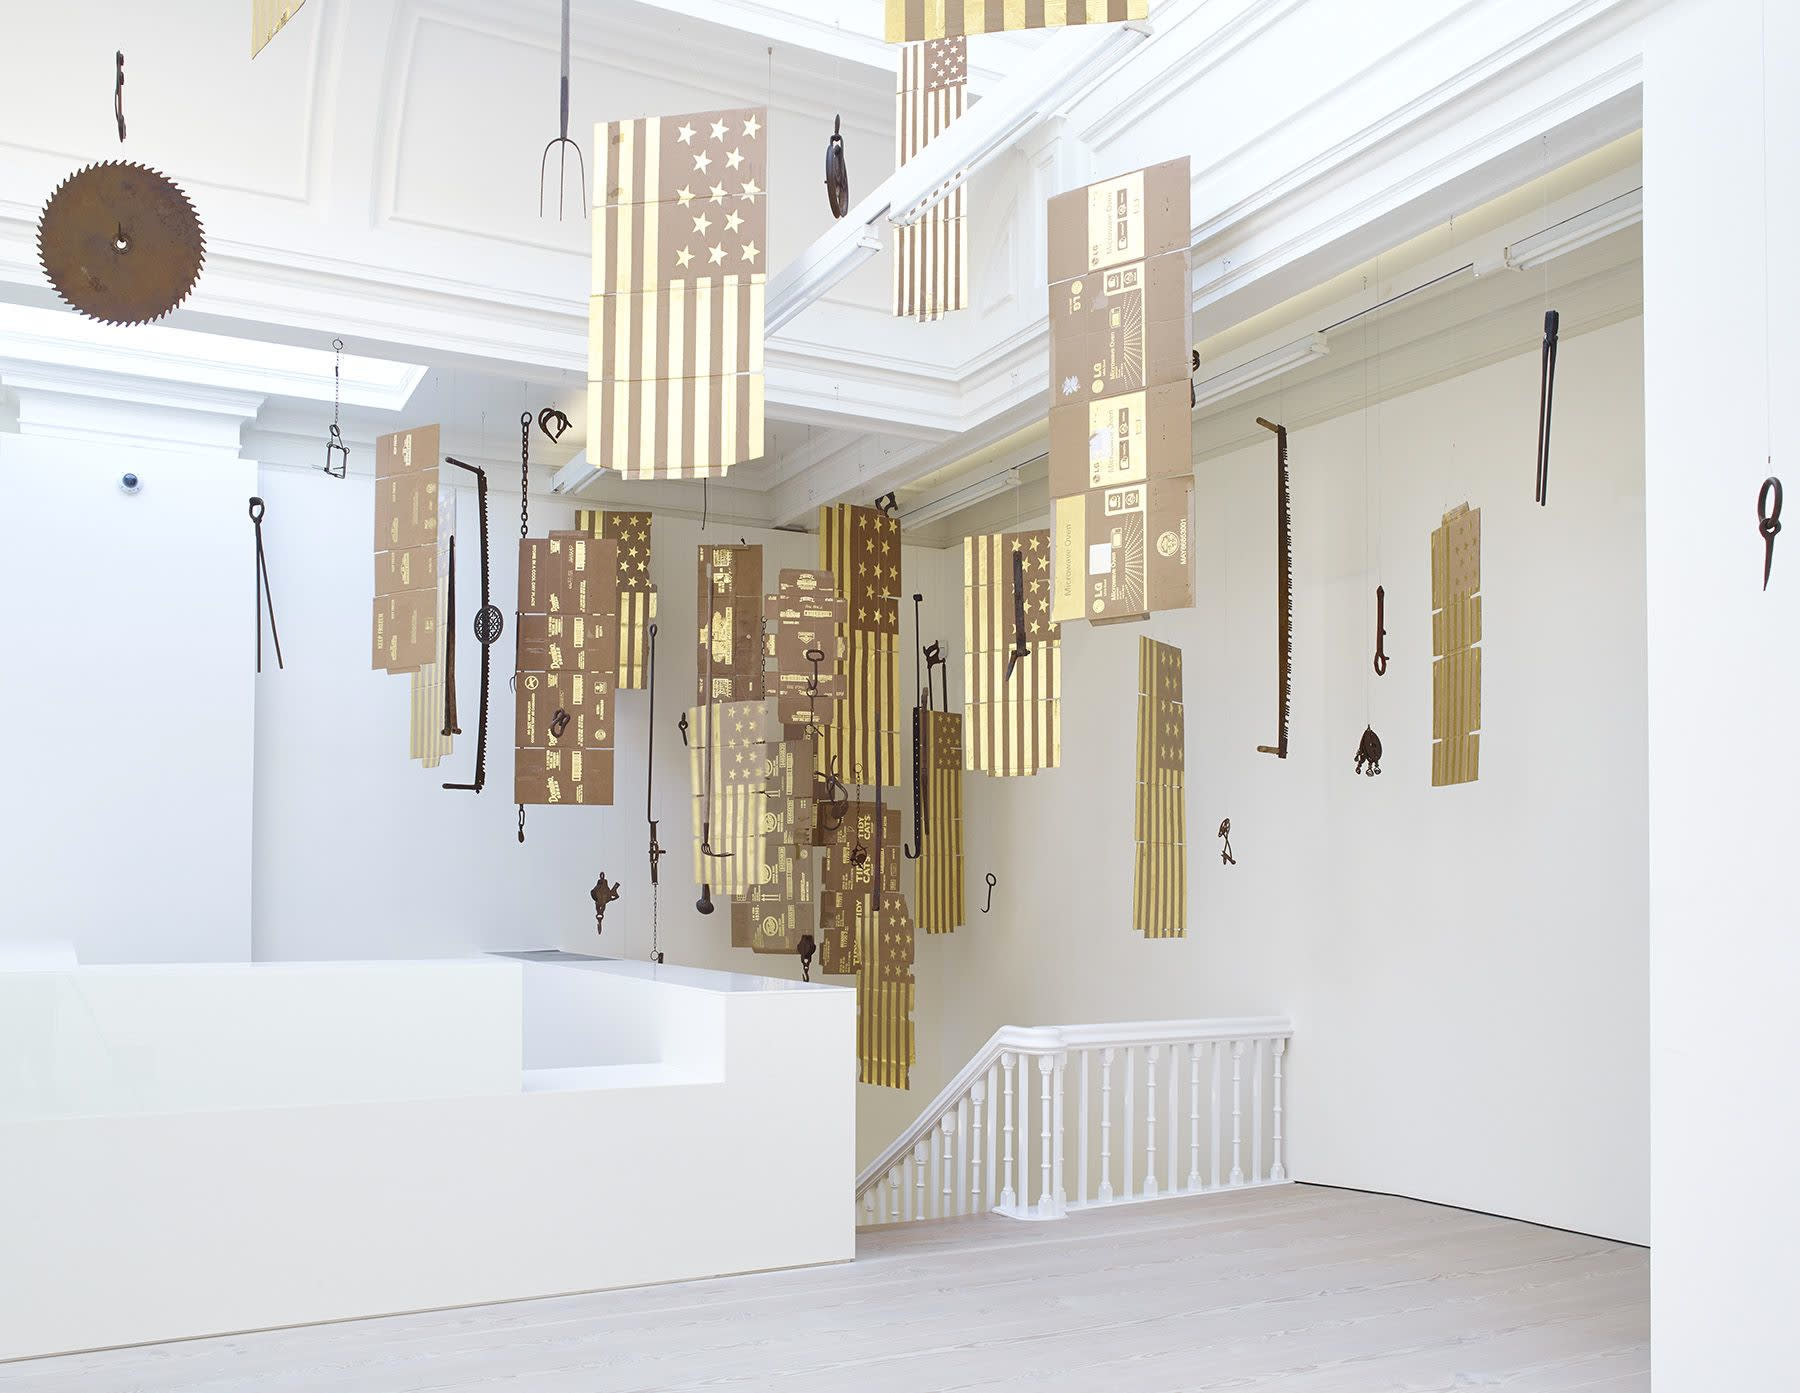 Gallery view of cardboard flags and numerous metal tools suspended from the gallery ceiling.